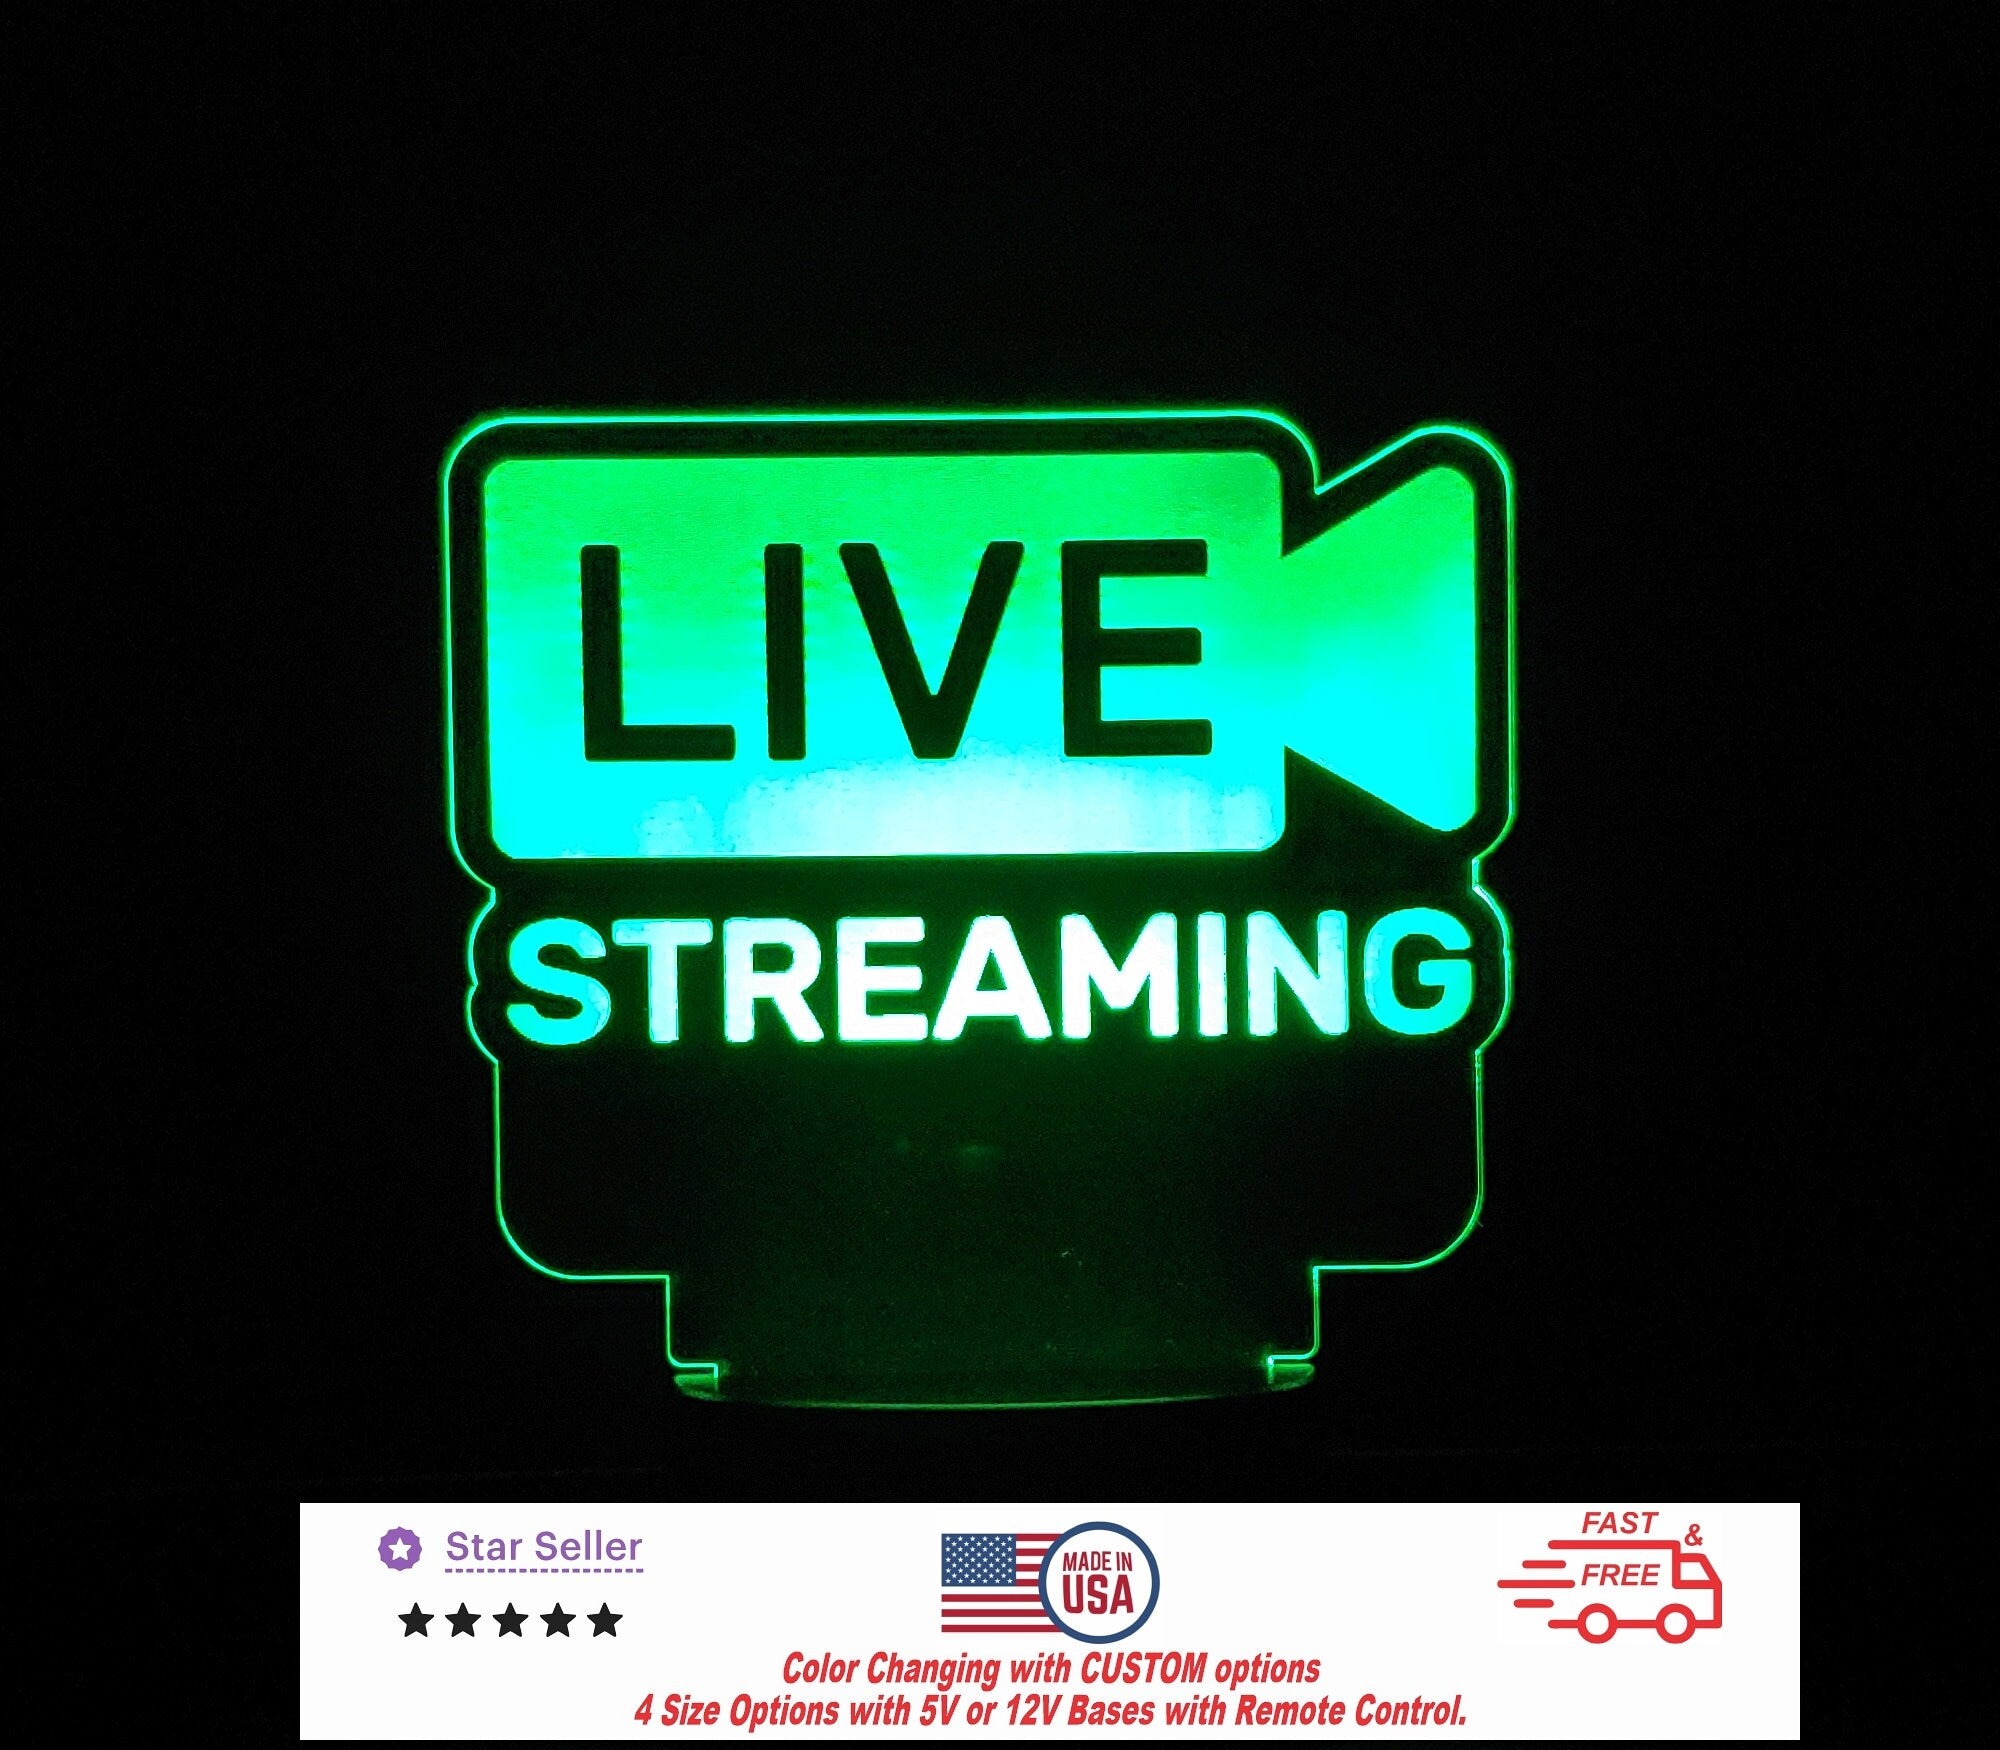 Live Streaming Personalized LED Night Light - Neon sign, Room Decor, Recording Music, Stream, Music Studio 4 sizes Free Shipping Made in USA